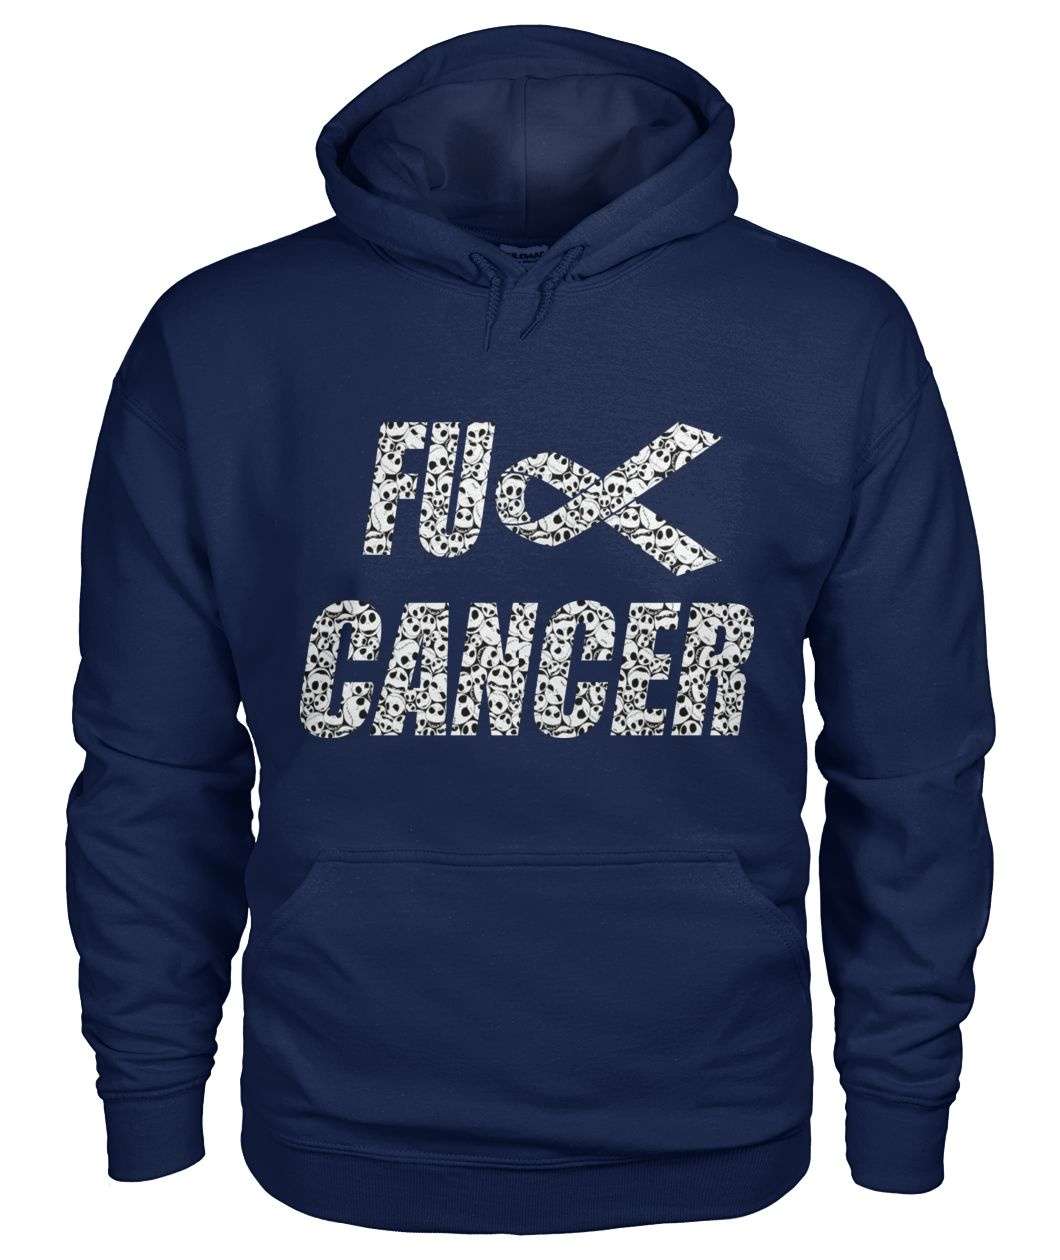 Fuck cancer - Cancer awareness T-shirt, fight against cancer